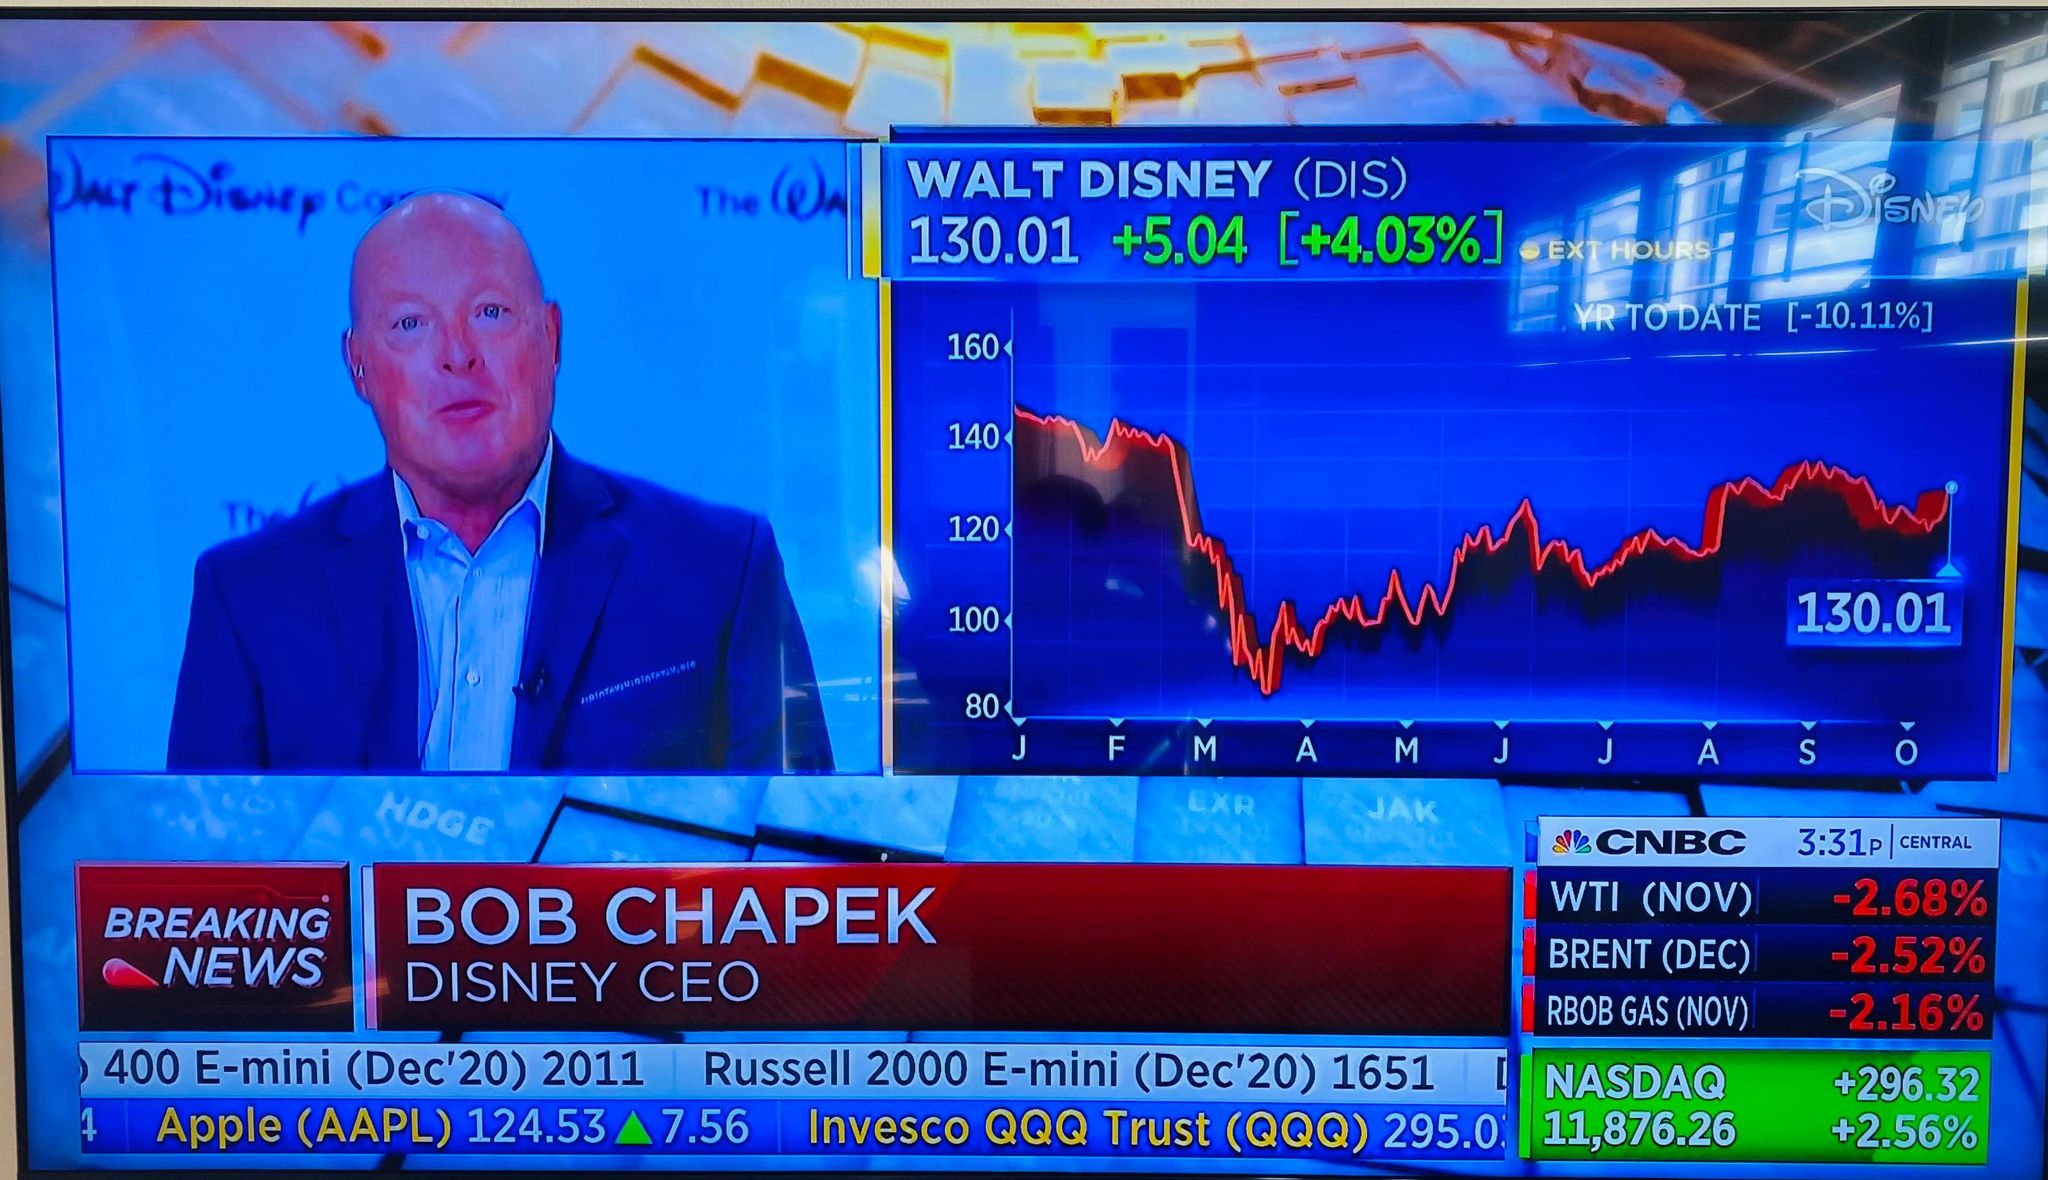 Bob Chapek was made for CNBC